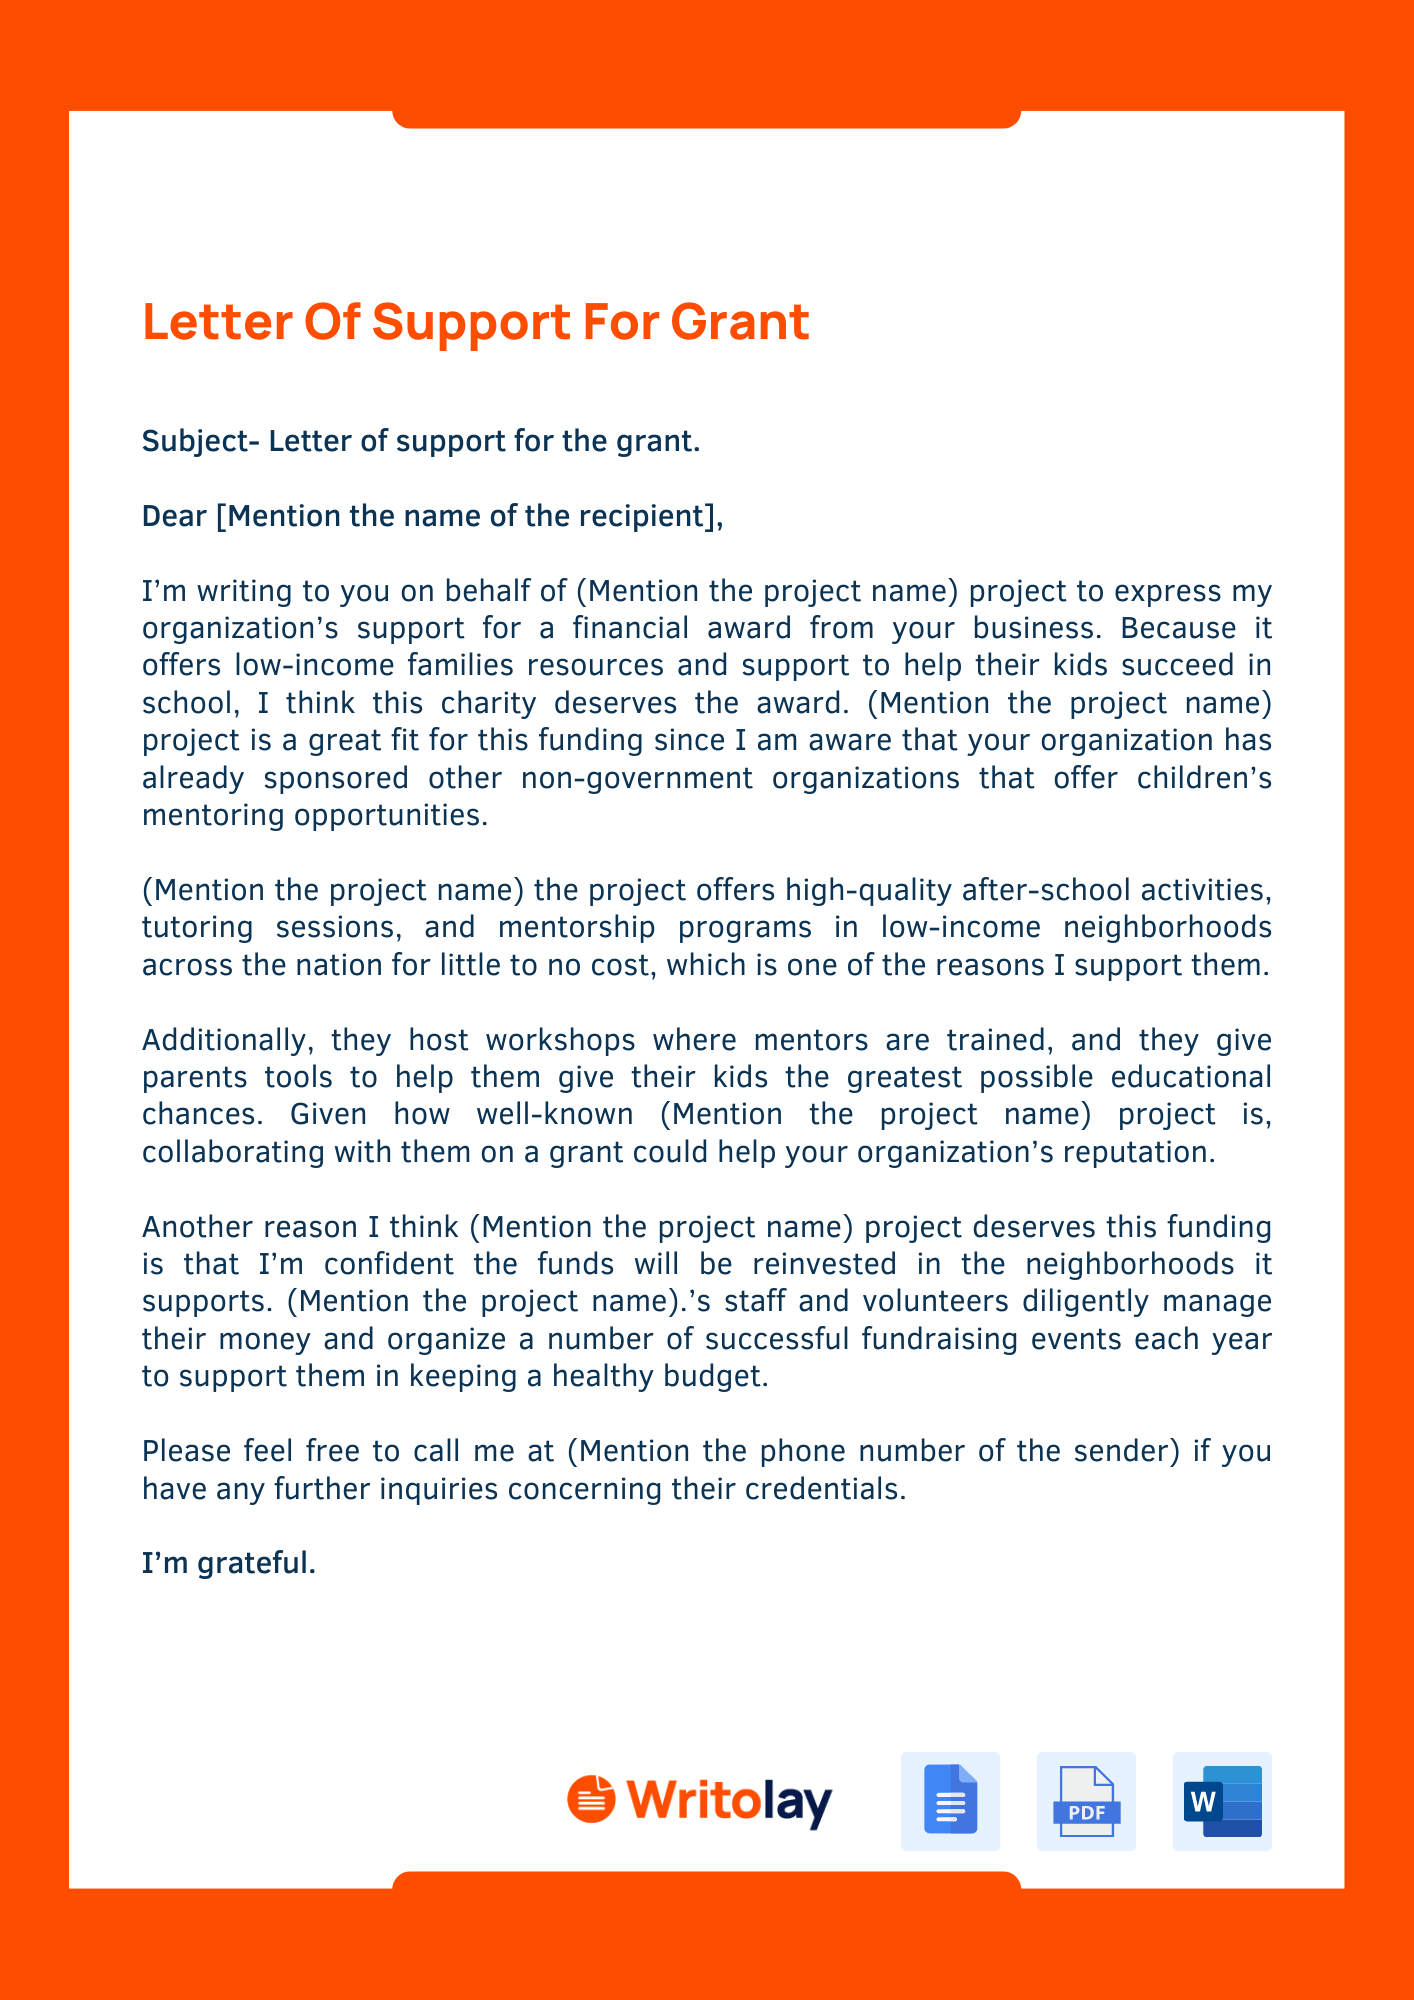 grant application letter of support for grant